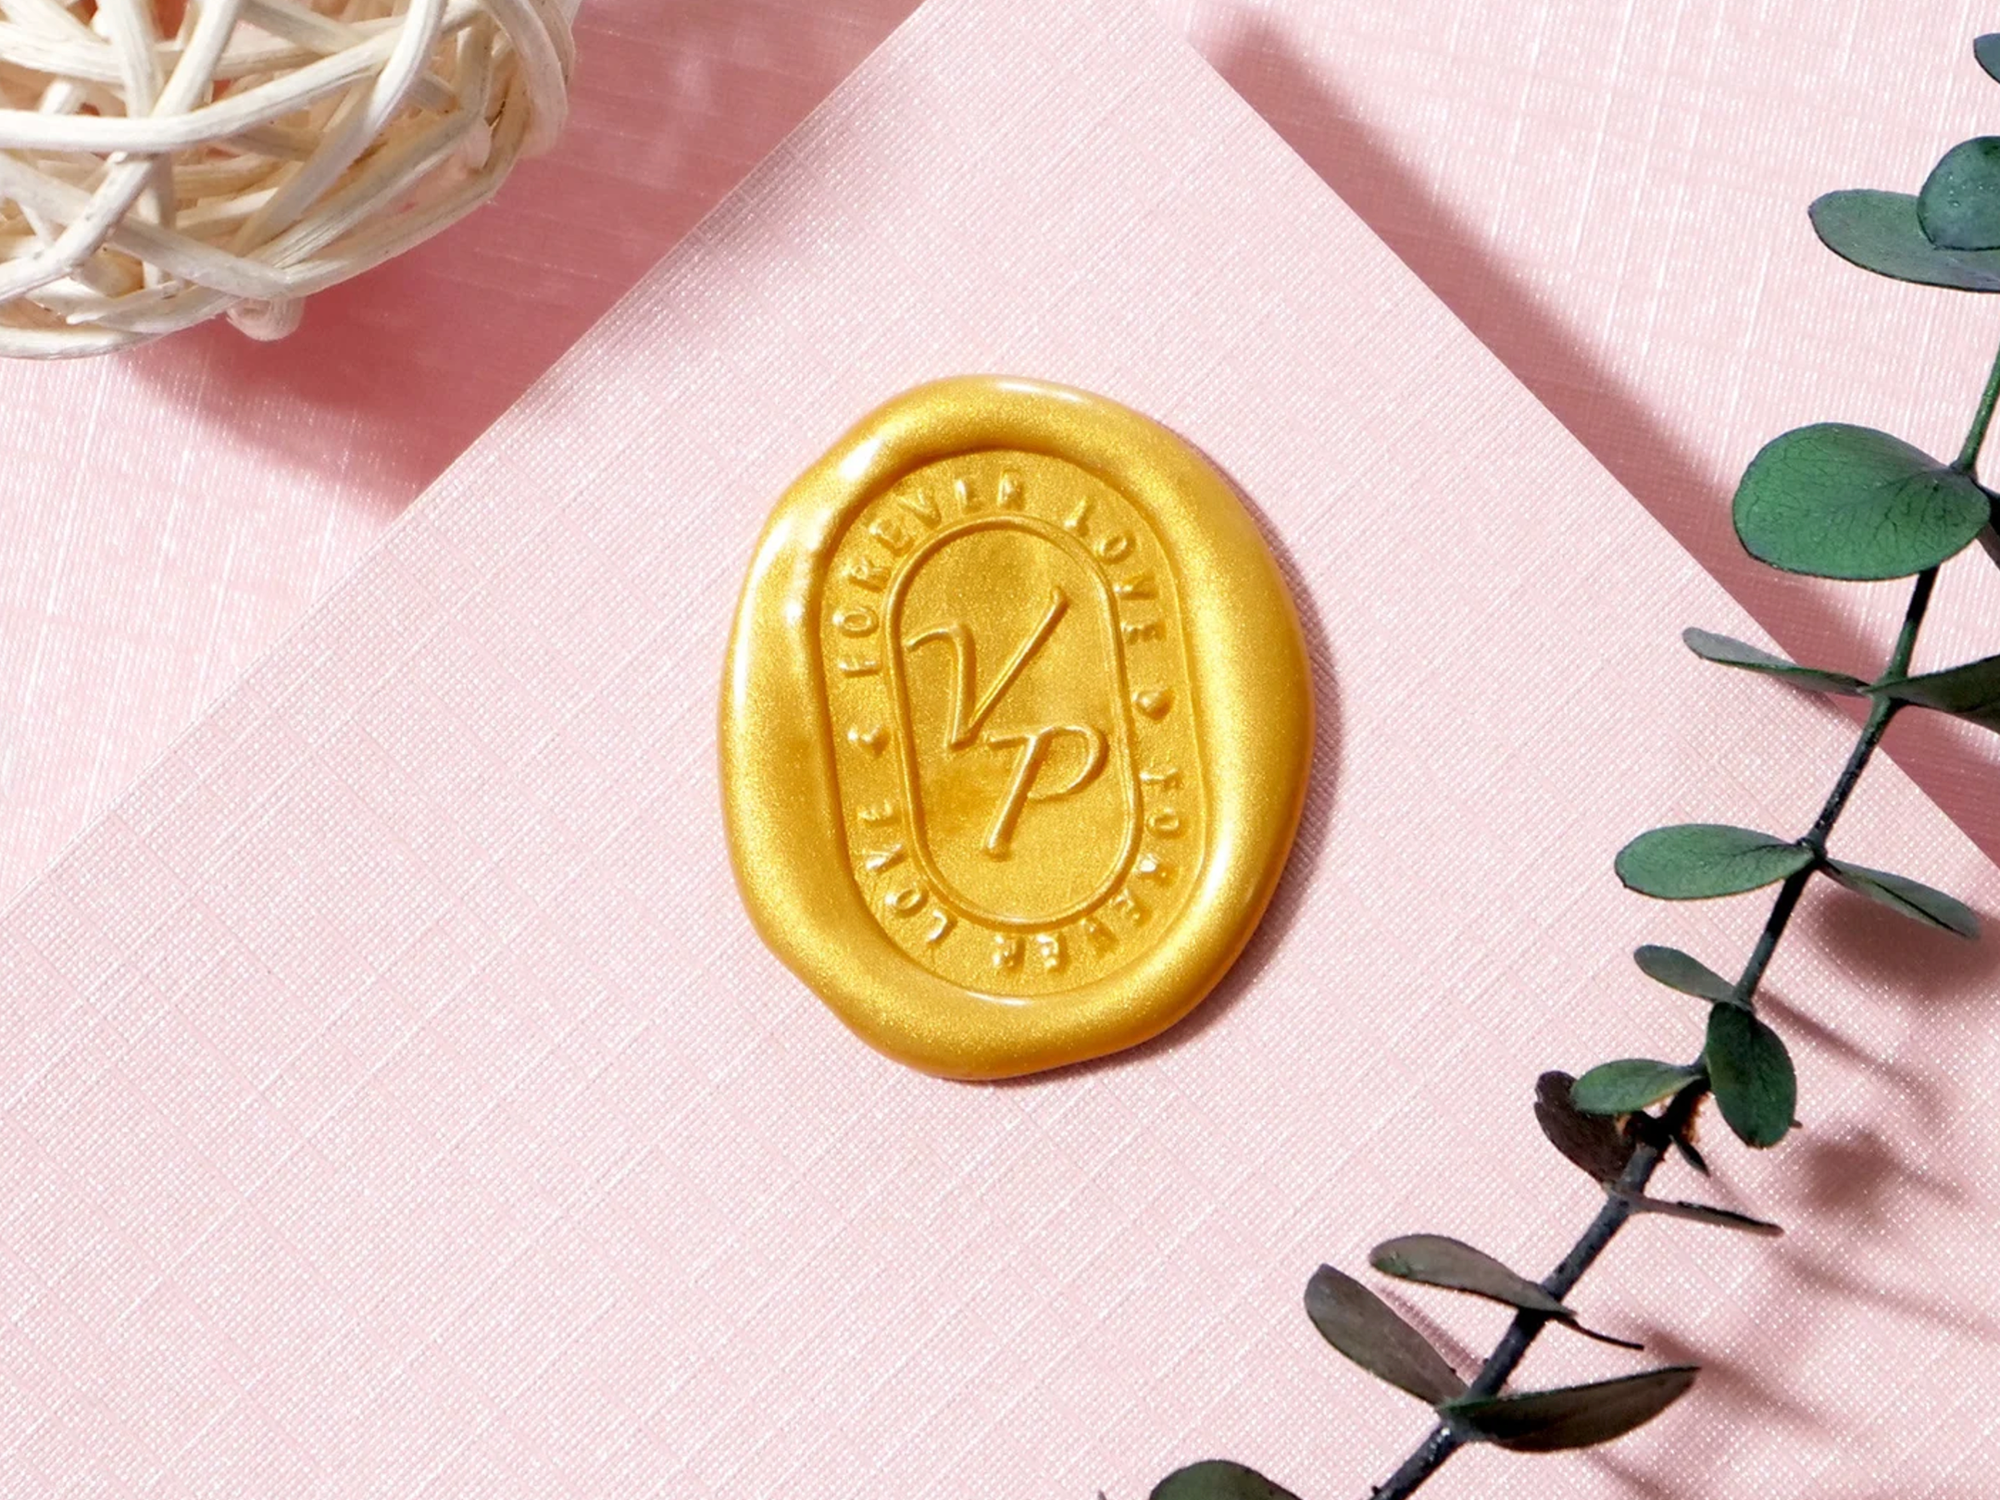  25 White & Gold Wax Seal Stickers - Wax Seals for Wedding  Envelope Seals - Wax Seal Stamp - Sealing Wax for Wedding Invitations -  Golden Seal for Bridal Postage Stamps - Wedding Postage Stamps